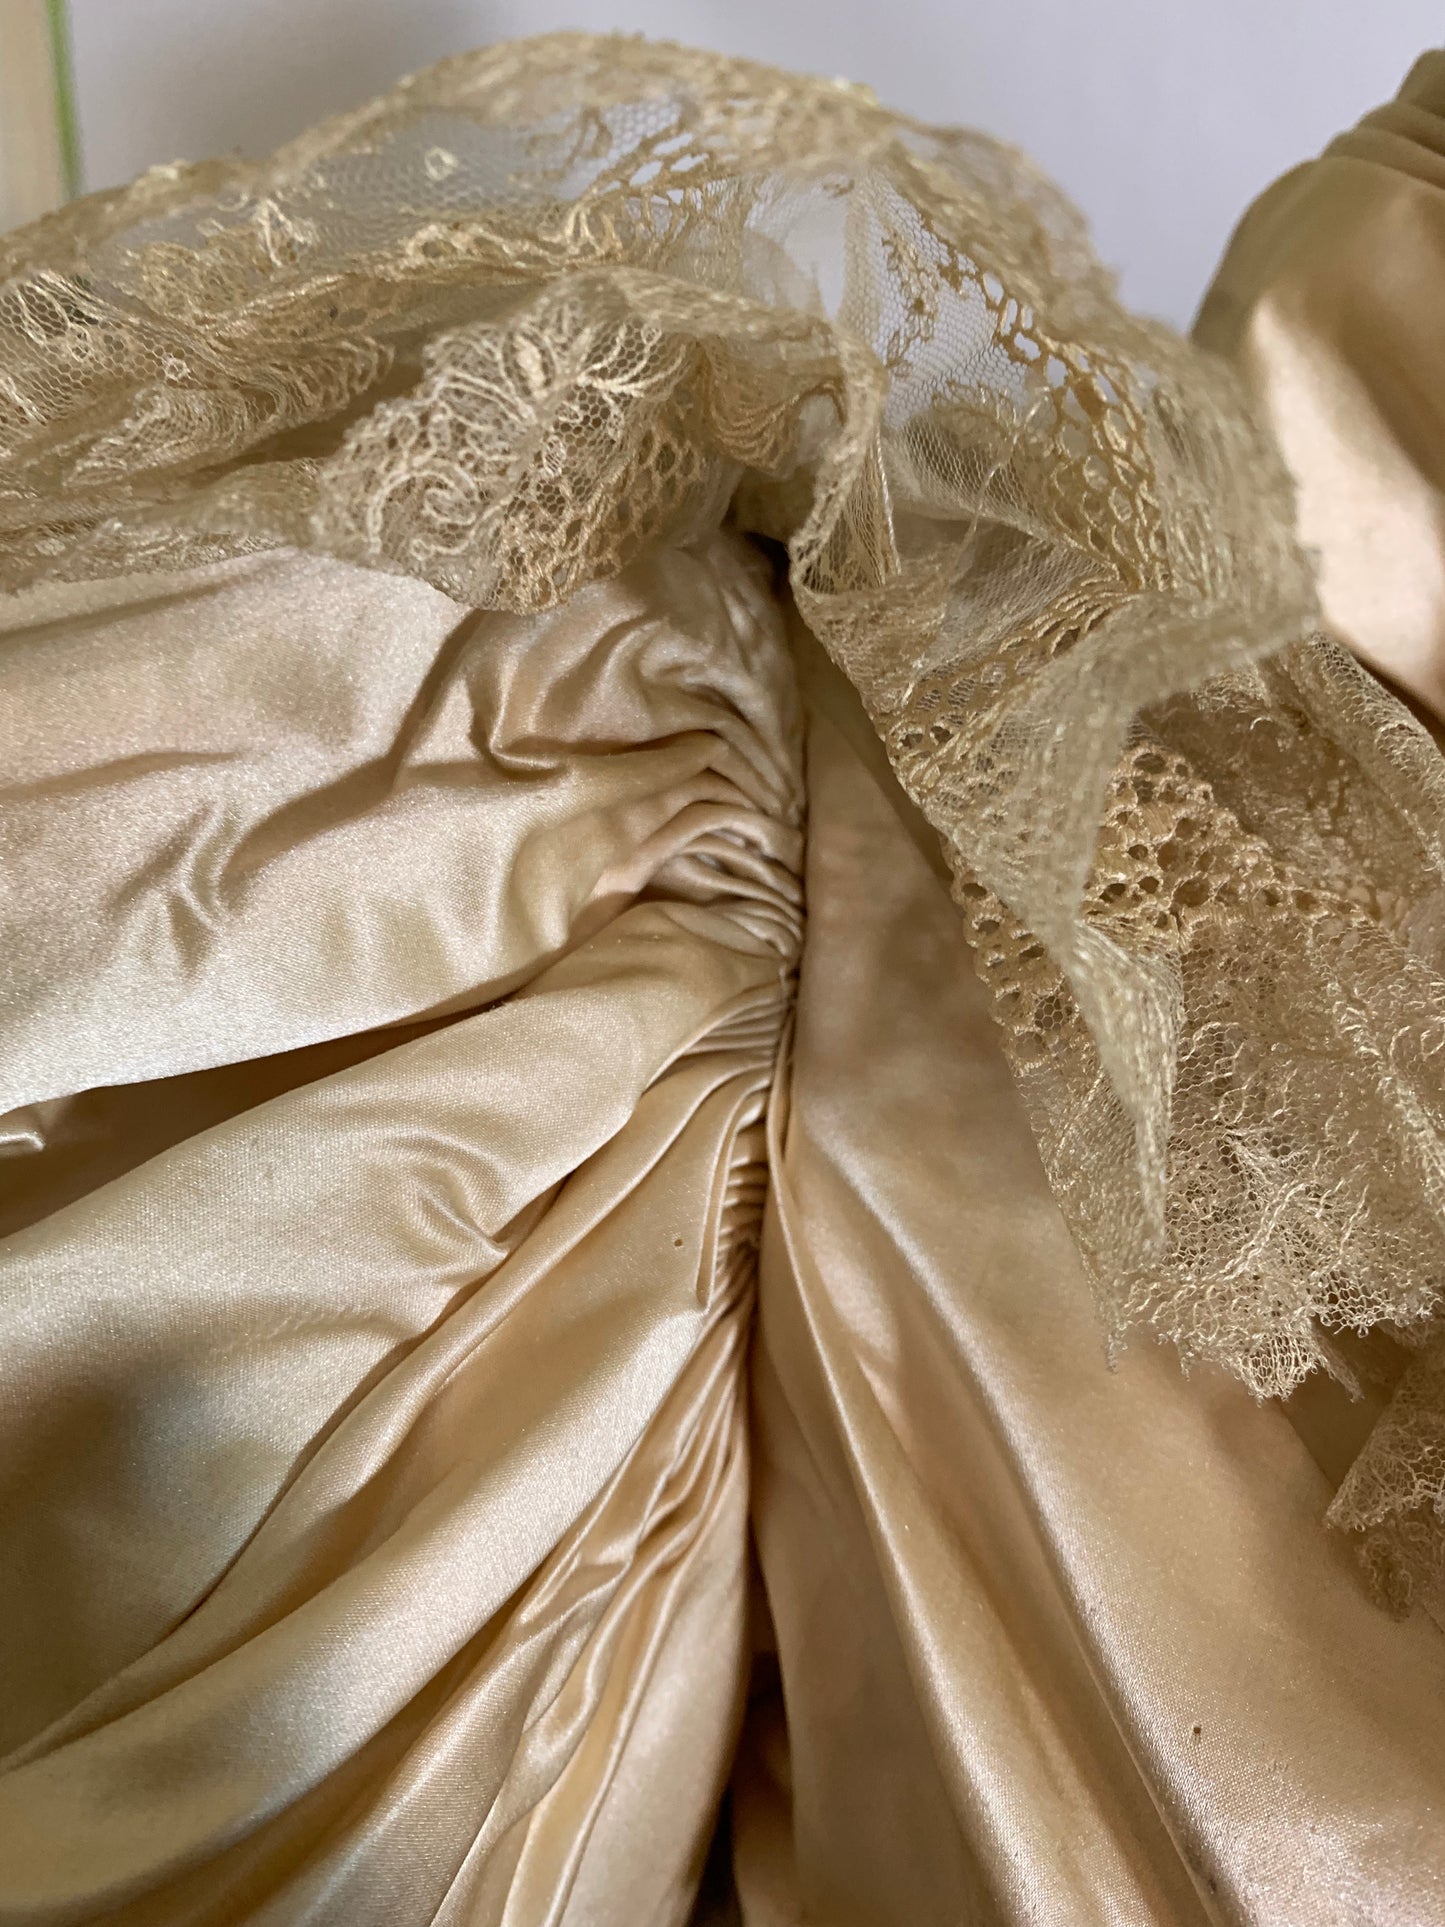 Candlelight Silk and Lace Bridal Ensemble with Leg of Mutton Sleeves and Bible circa 1895